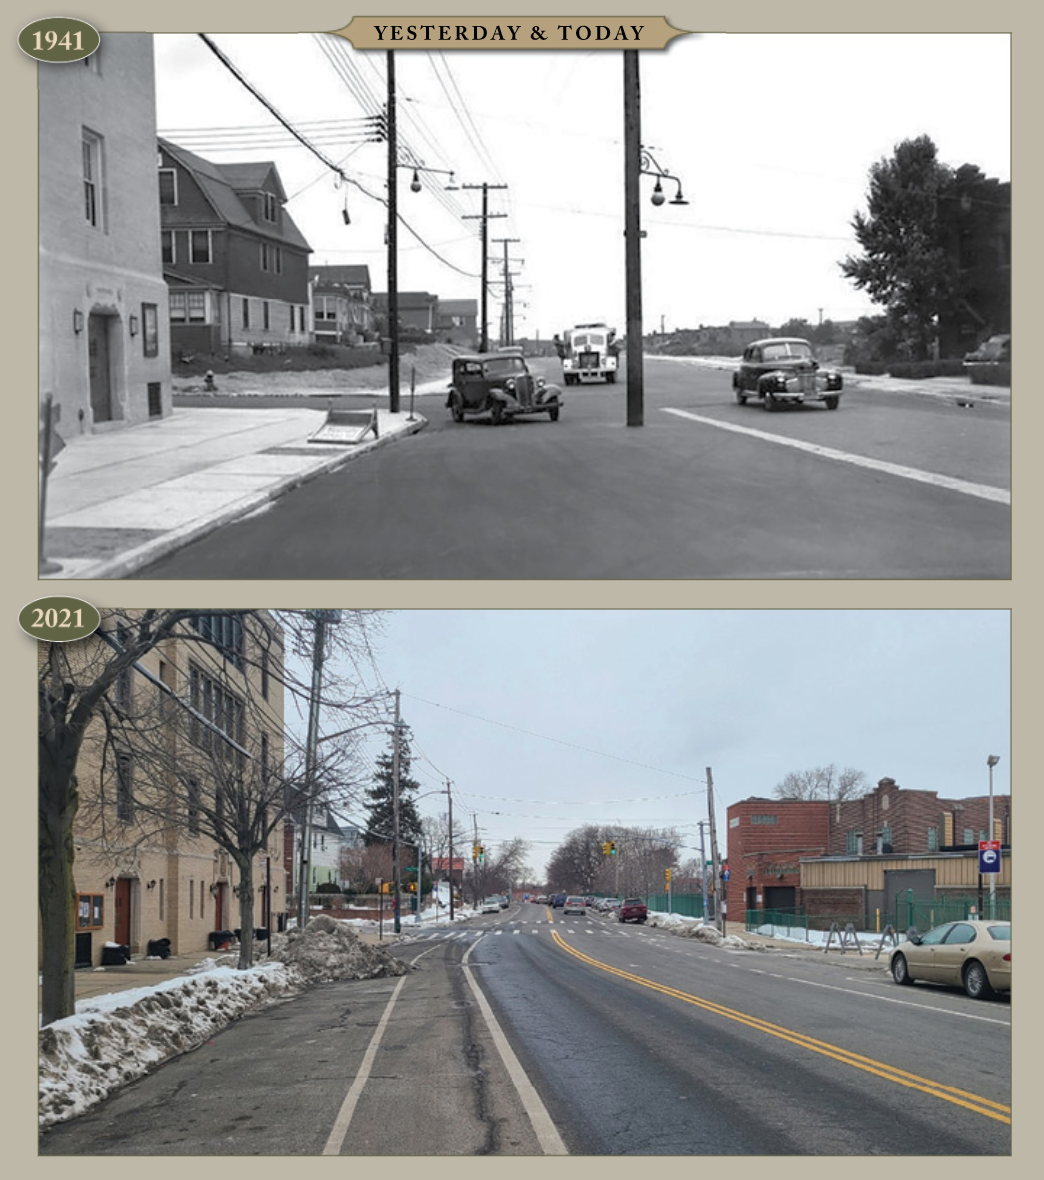 Yesterday and Today: 80th Street from St. Margaret’s Church, looking north